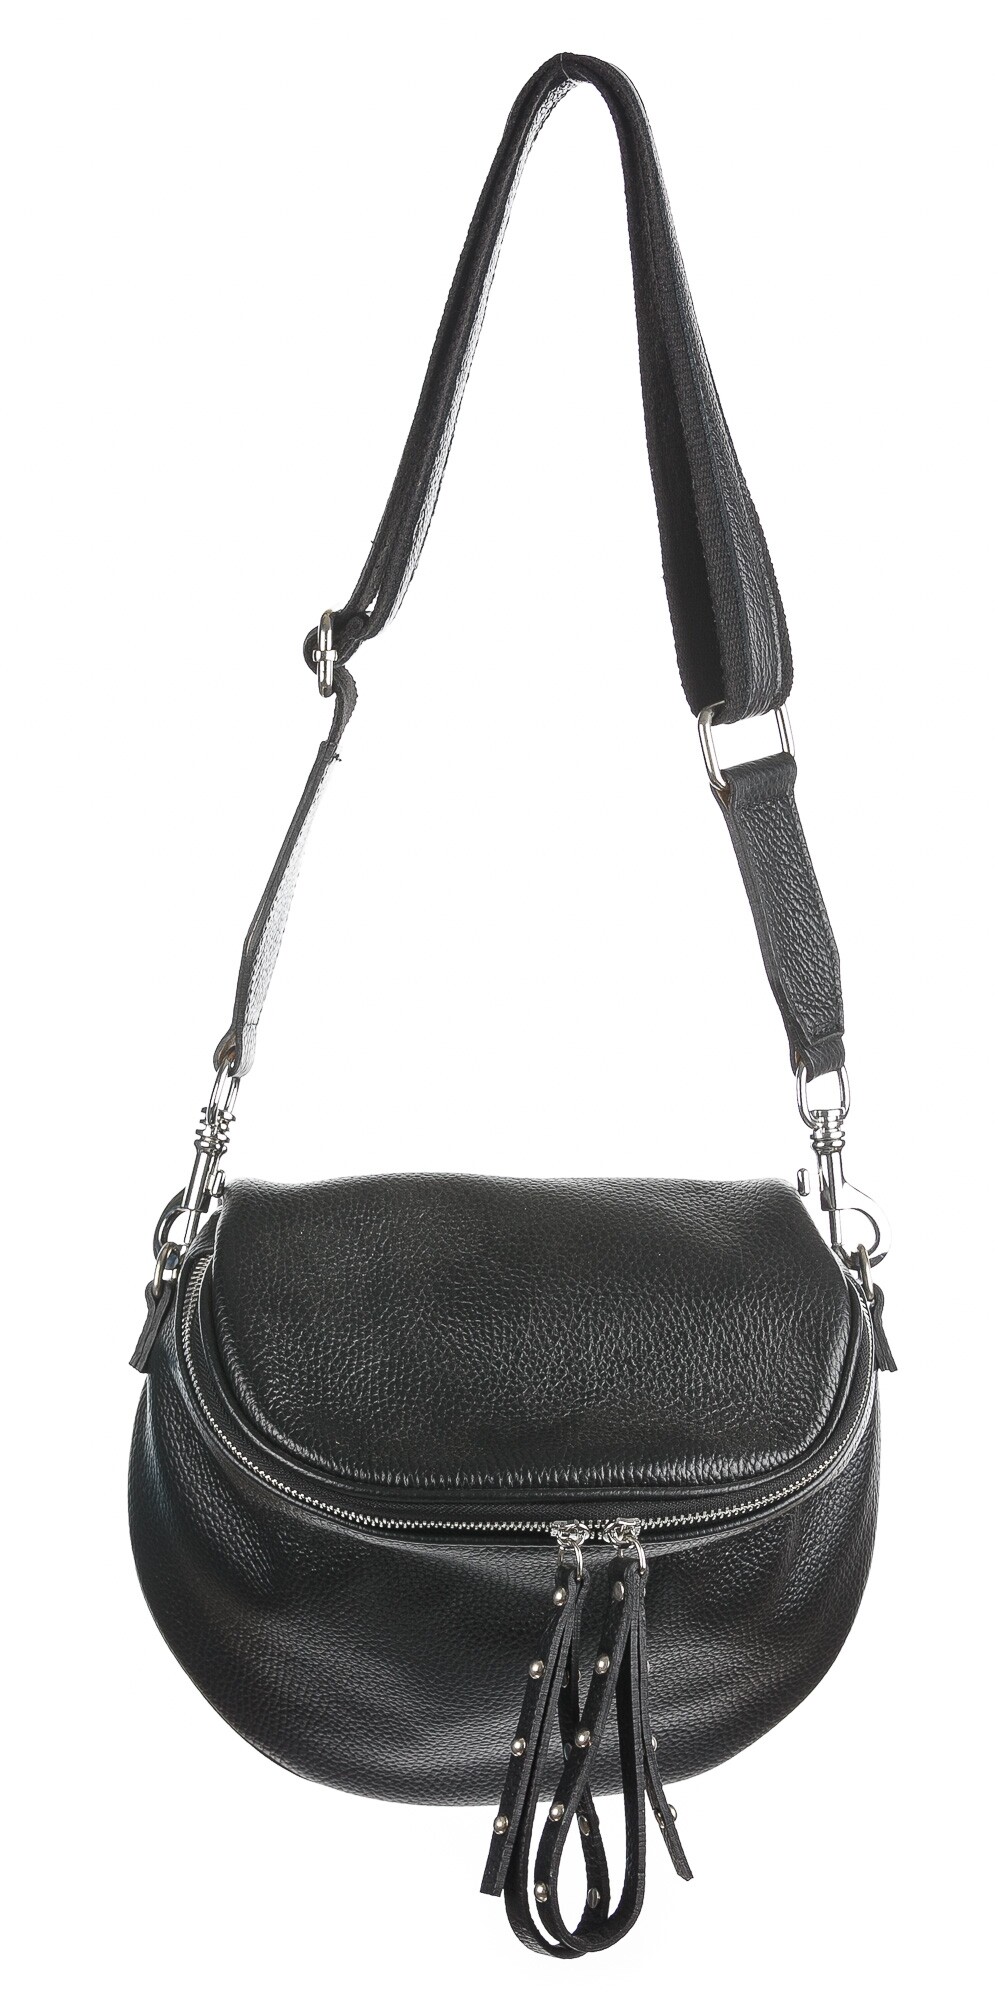 Crossbody bag for woman in genuine leather, EMILY, color BLACK,  CHIAROSCURO, Made in Italy, LADYS LEATHER BELT PACK